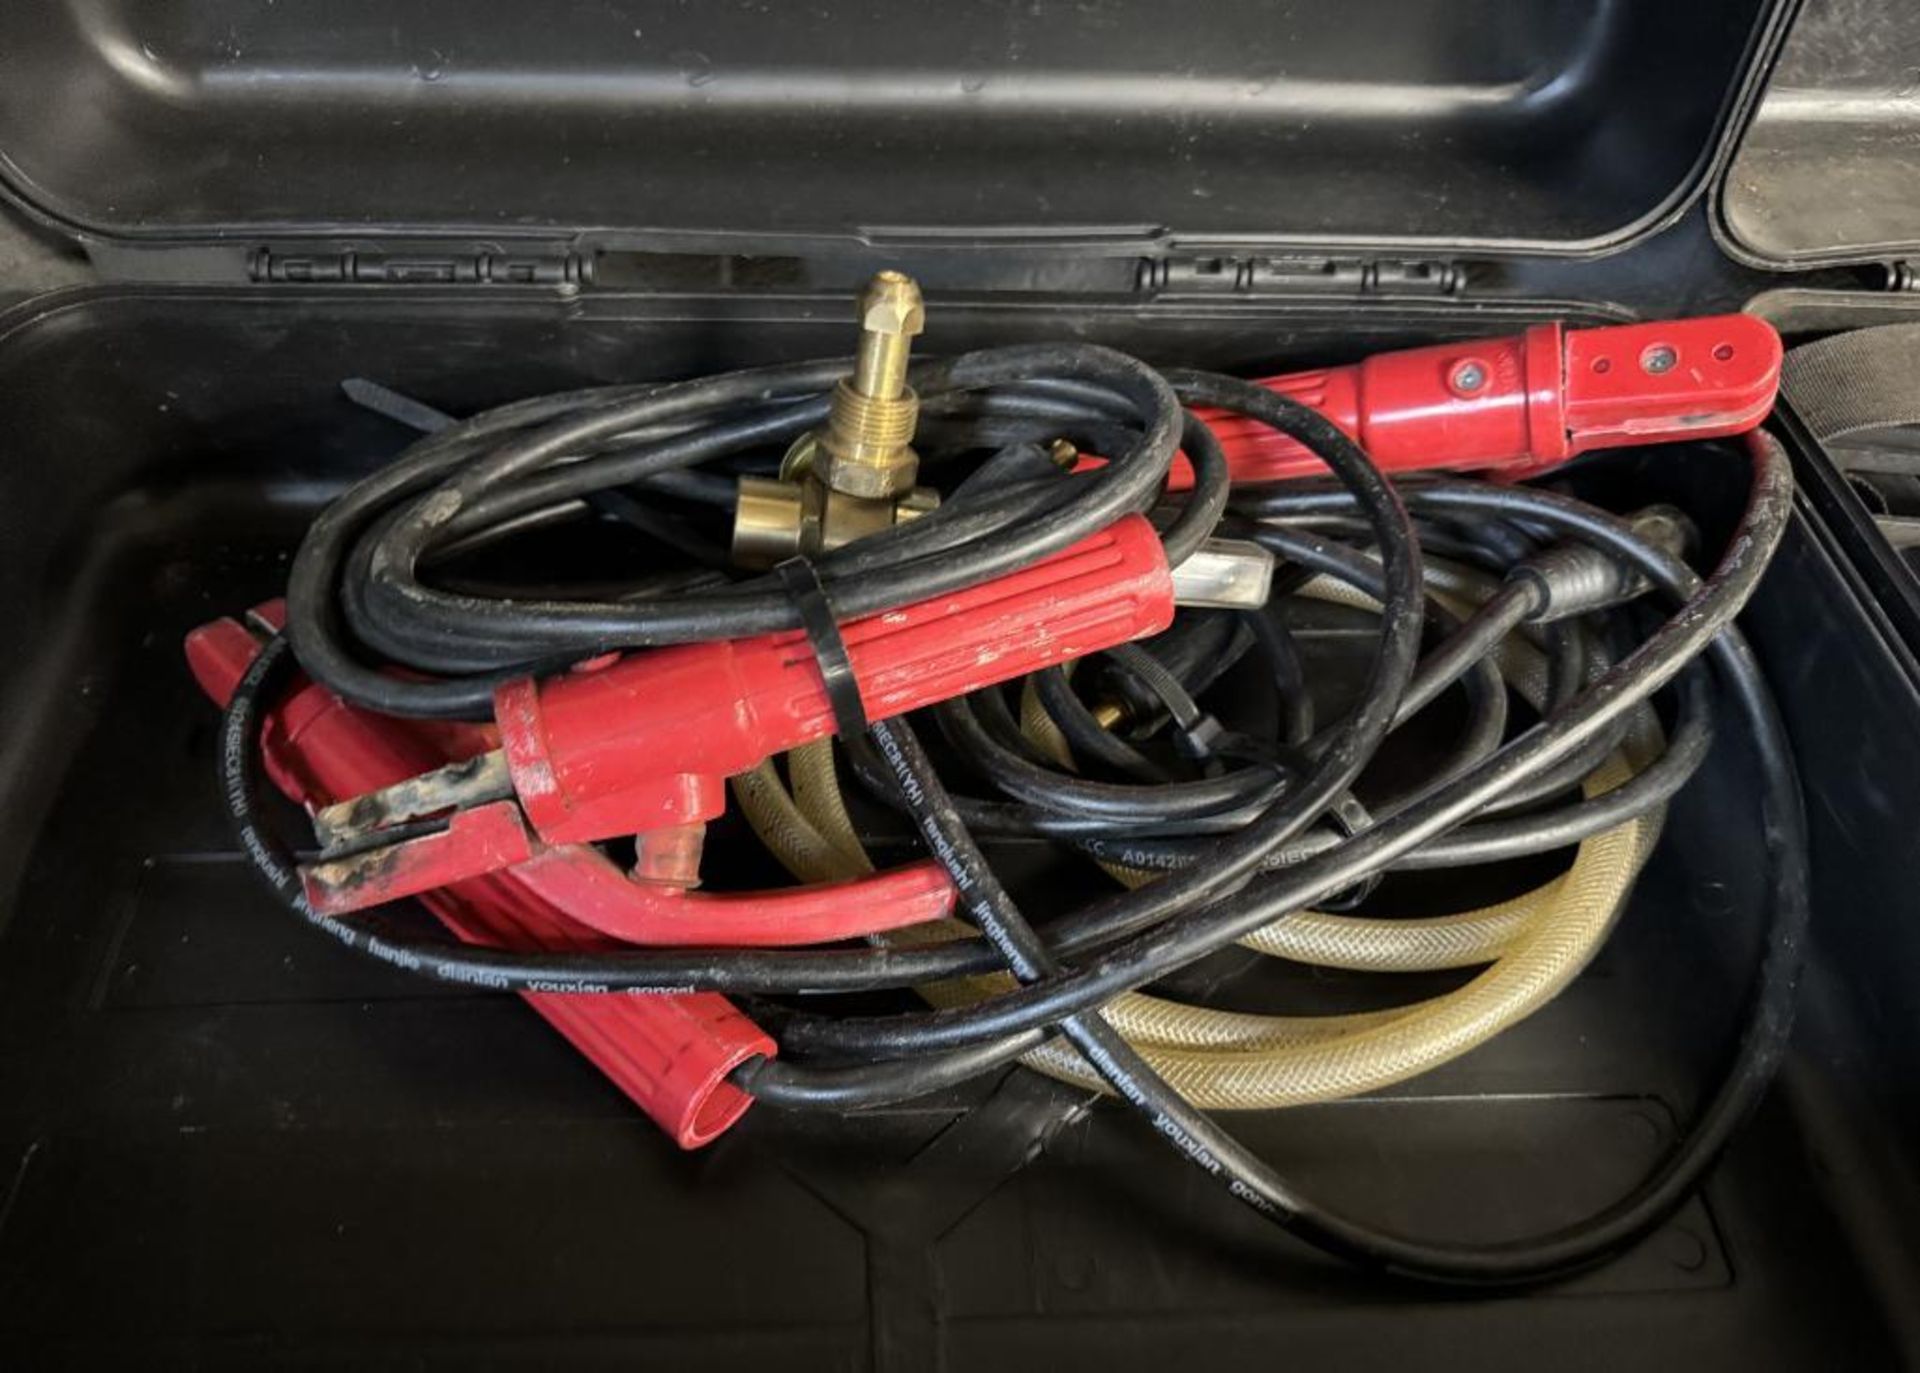 Lot Consisting Of: Everlast Powerarc 160 STH DC Tig Welding Parts Machine, misc. hoses, cords, cases - Image 4 of 7